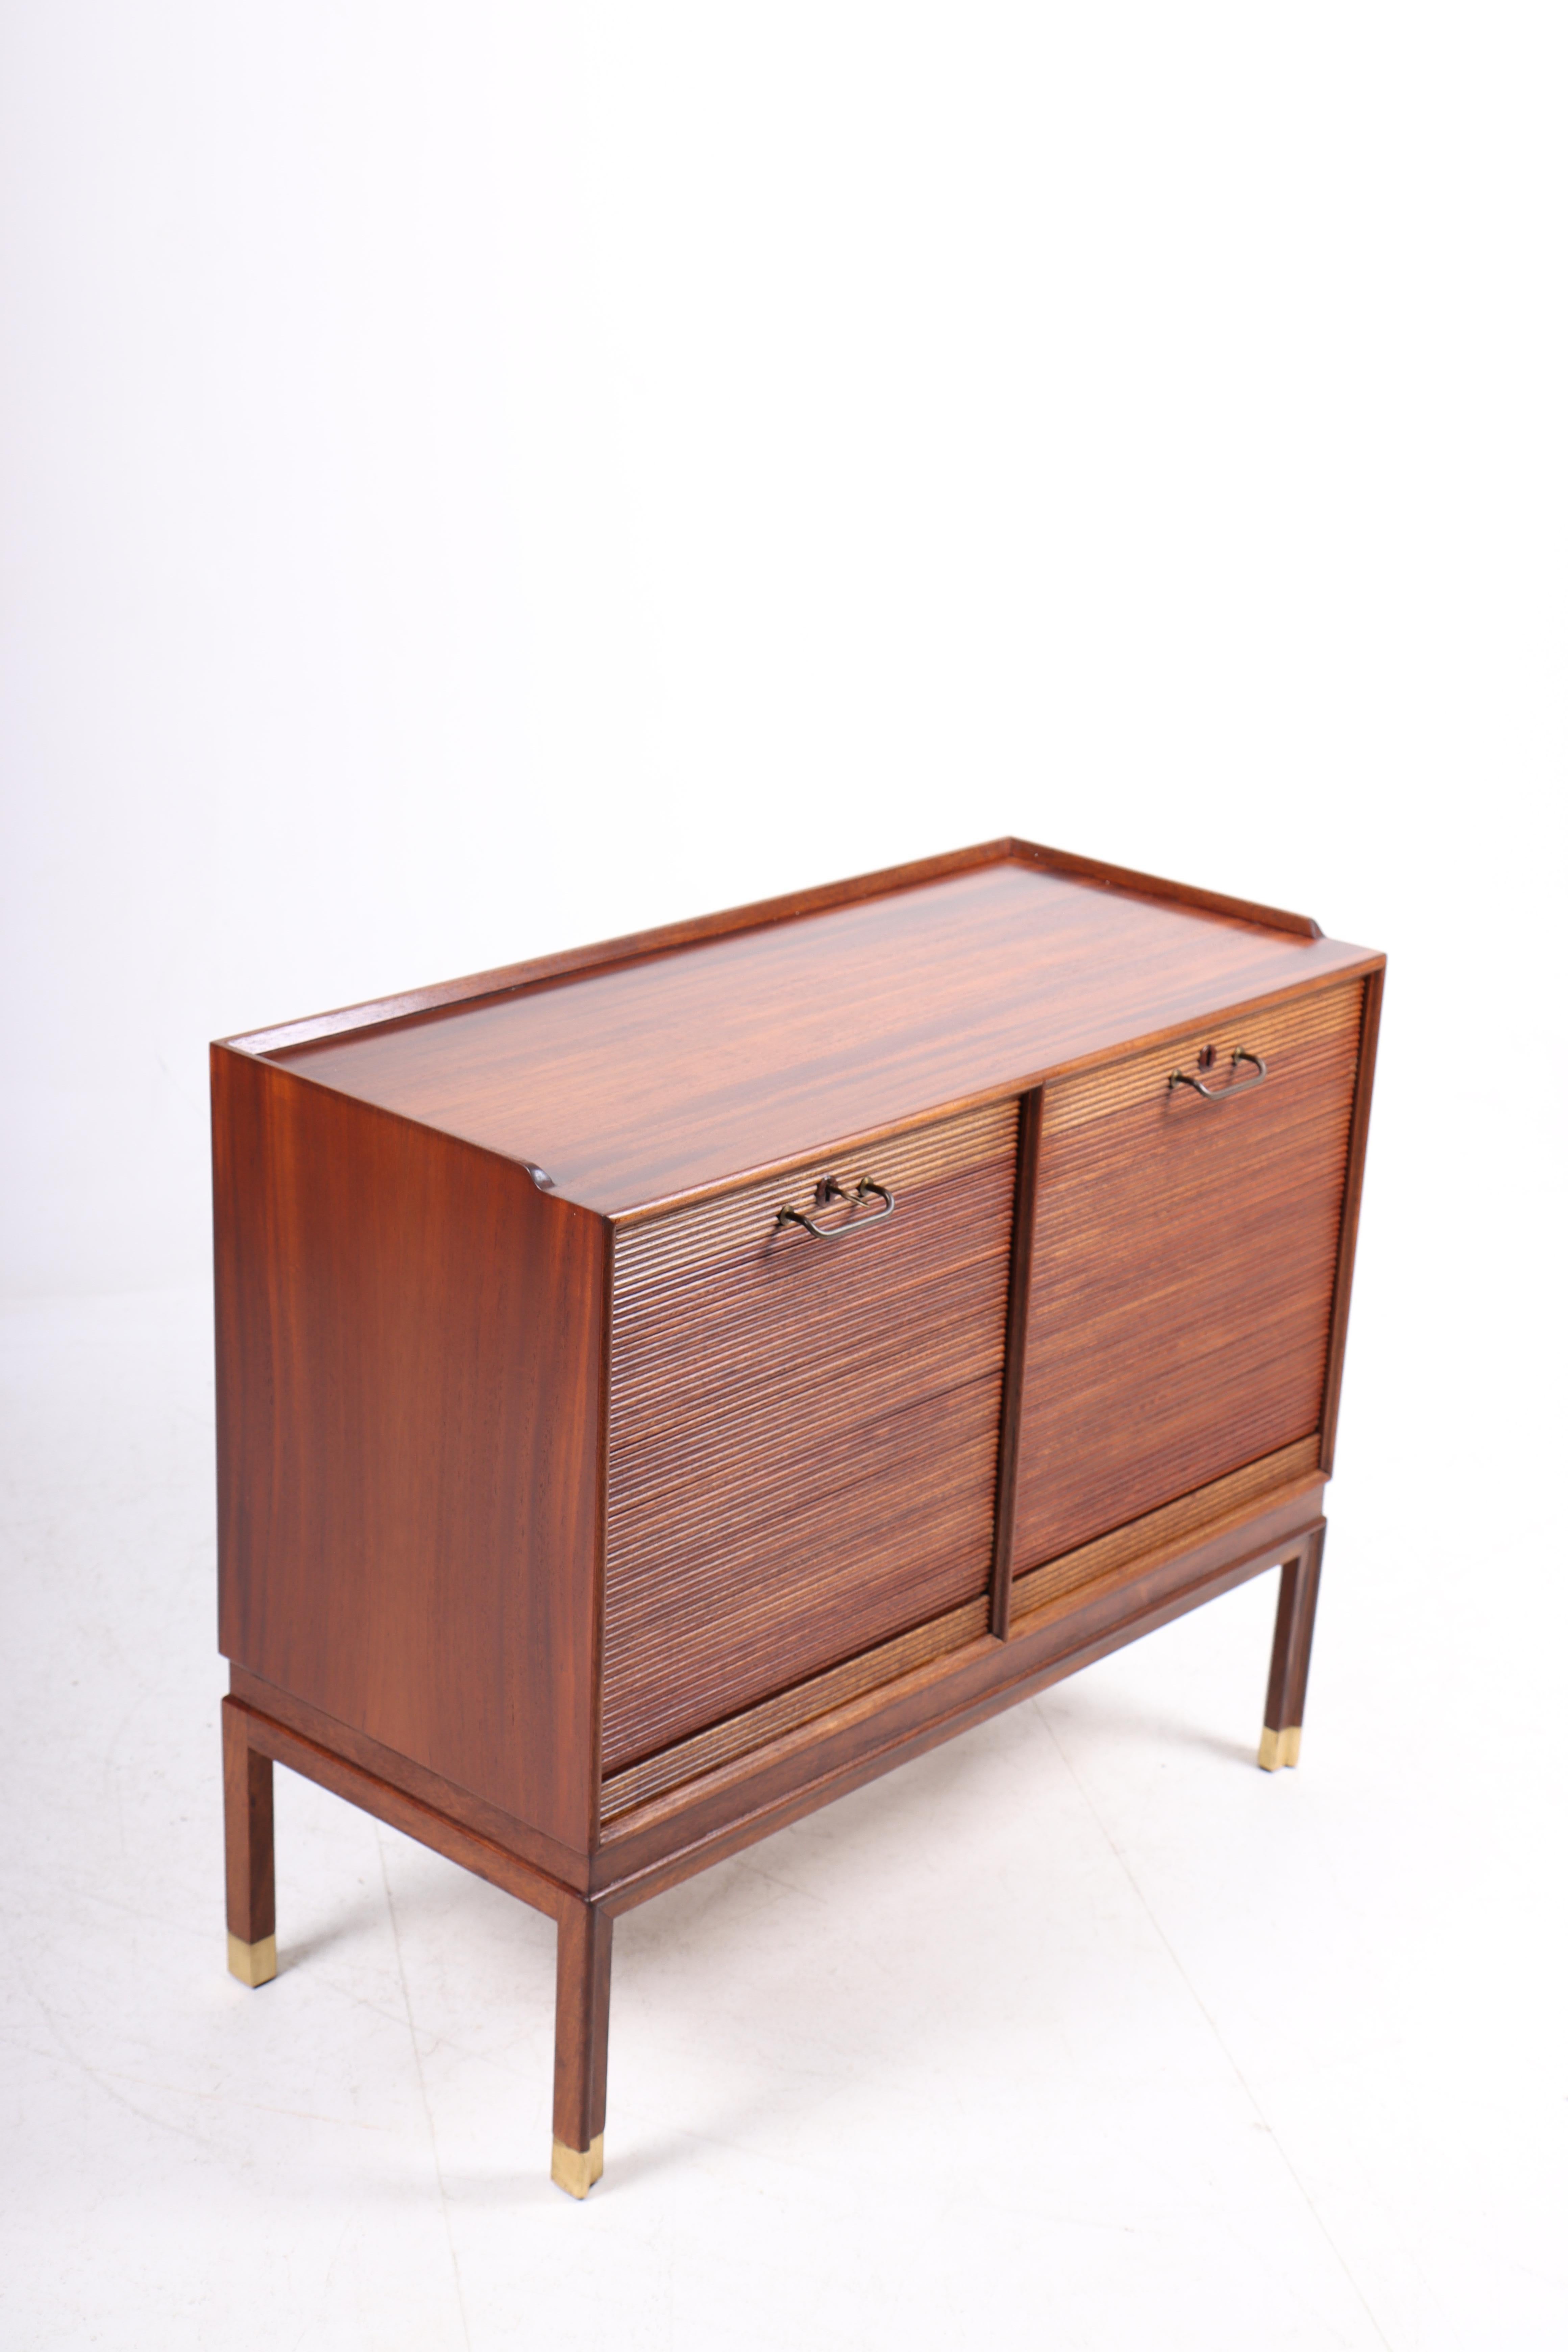 Brass Midcentury File Cabinet in Mahogany with Tambour Doors, 1950s For Sale